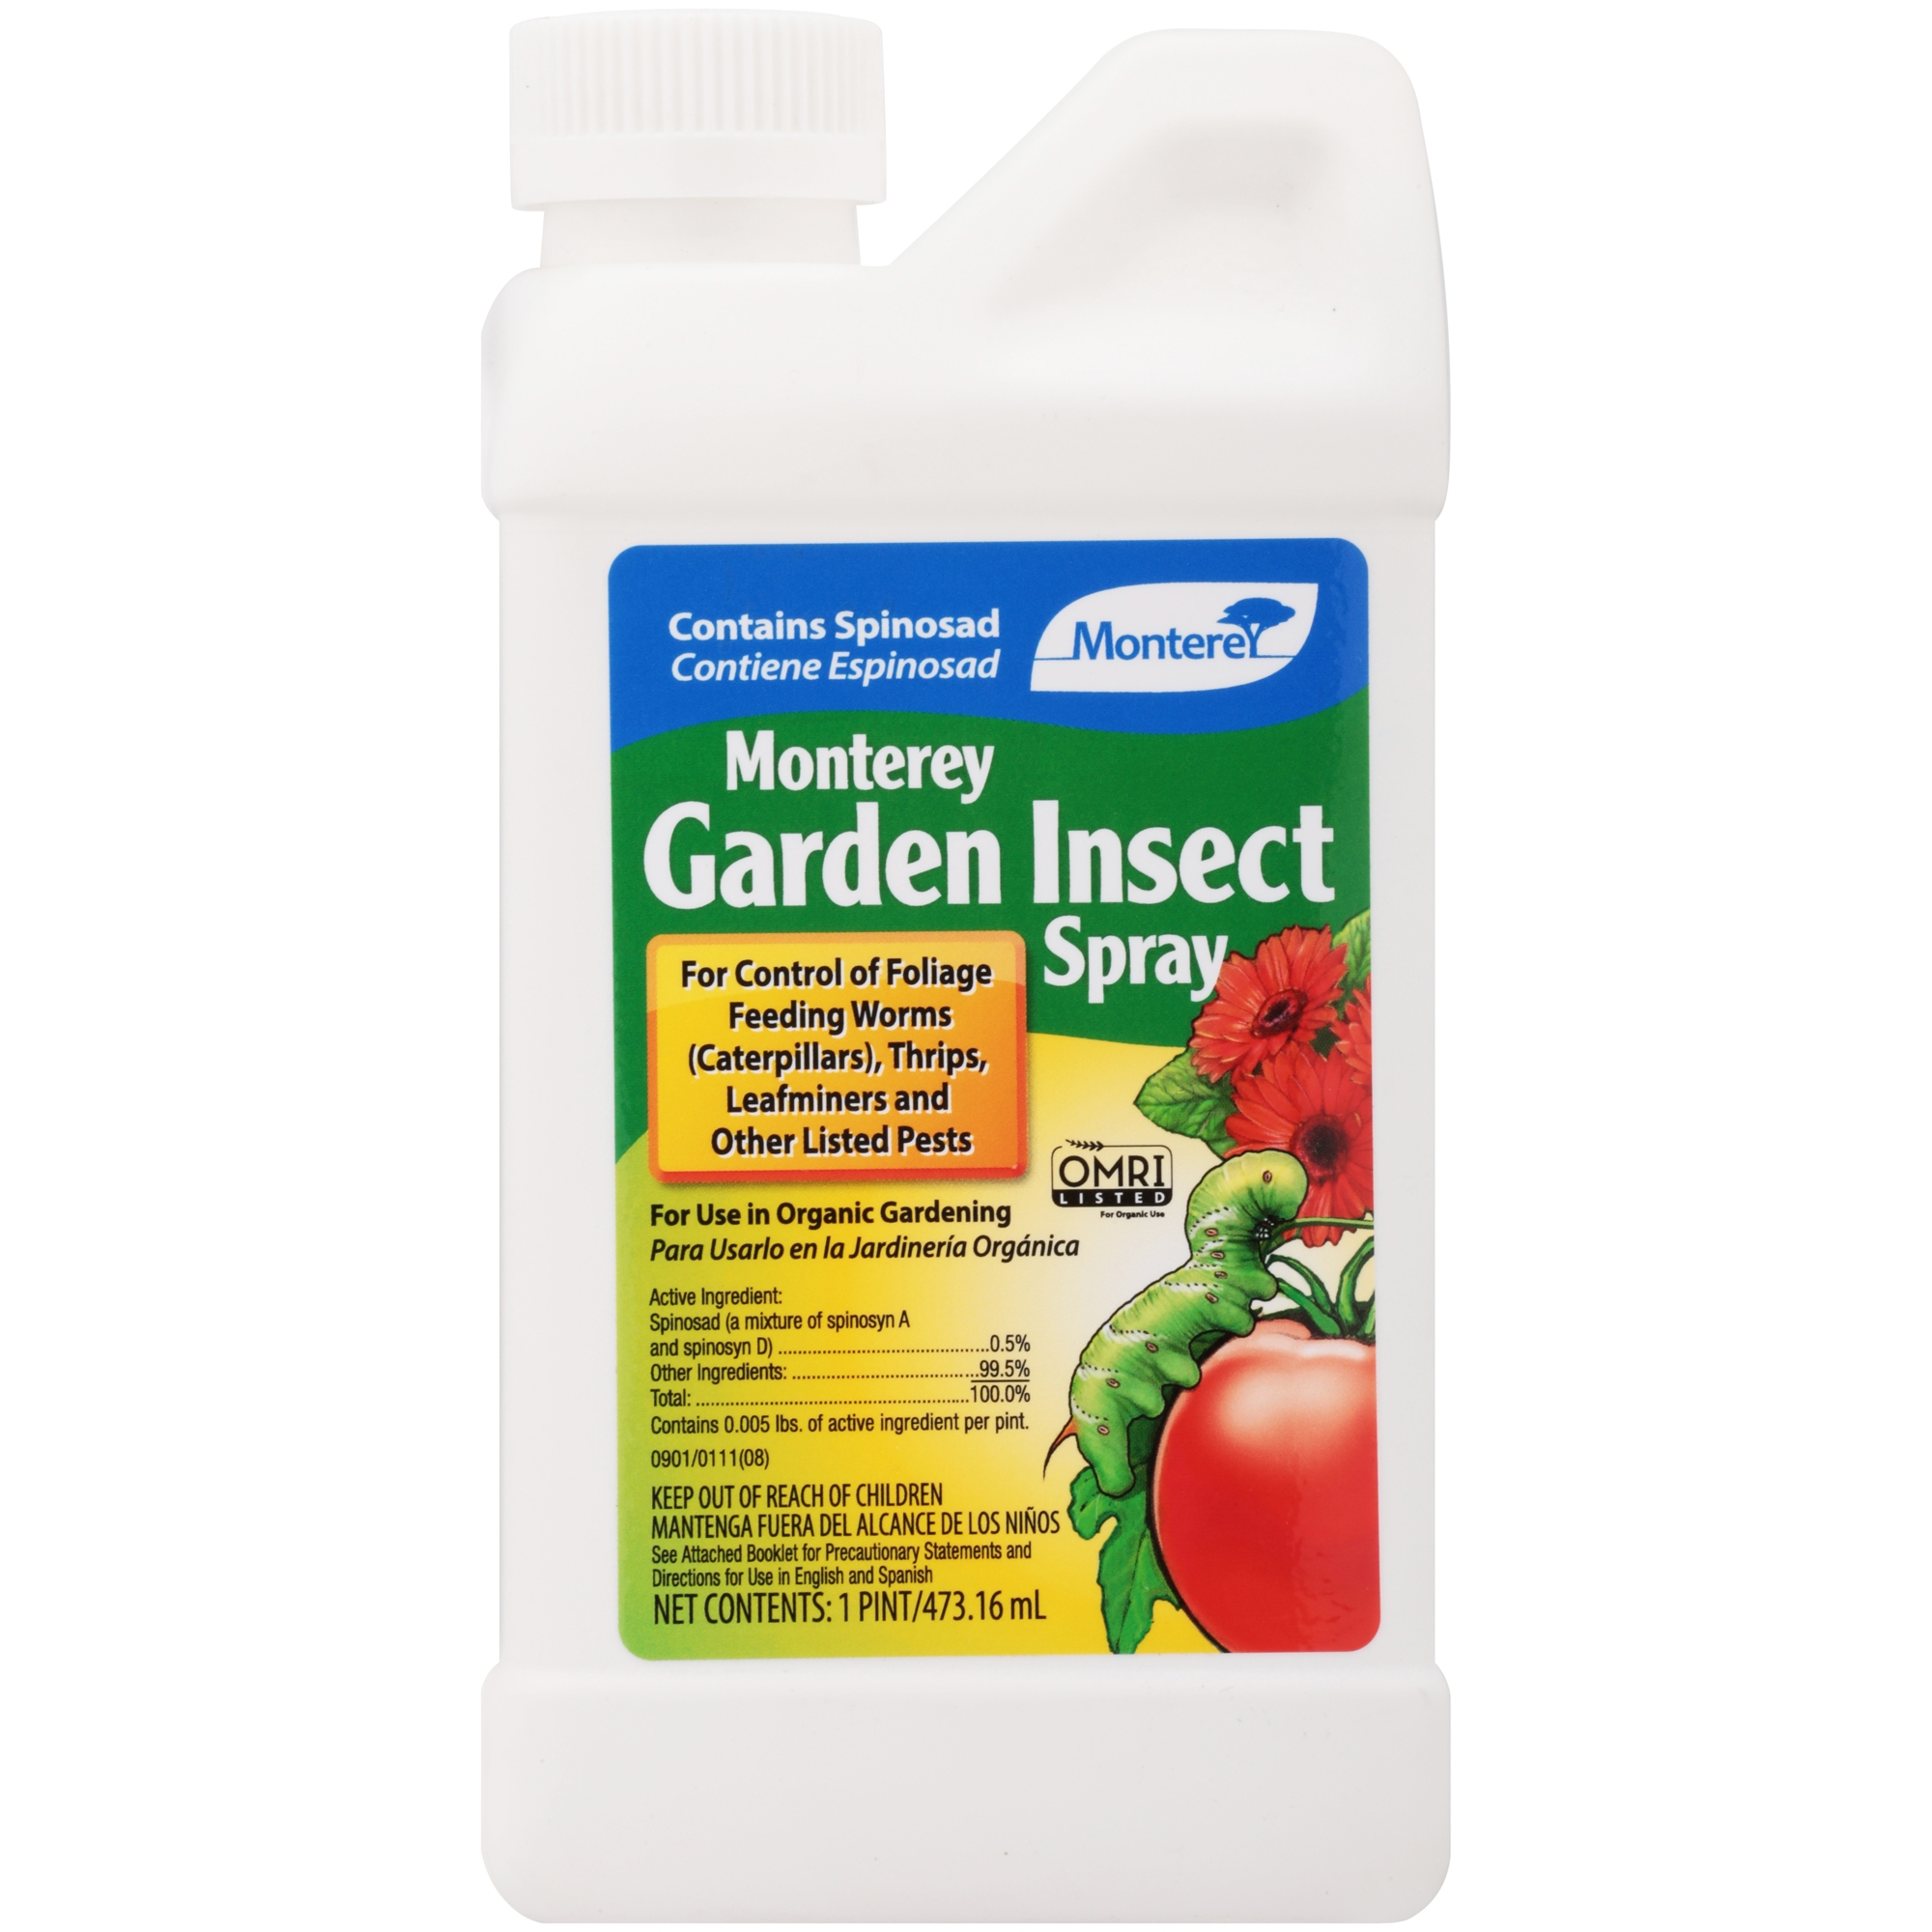 Monterey Garden Insect Spray Concentrate, for Organic Gardening, 16 oz. - image 1 of 9